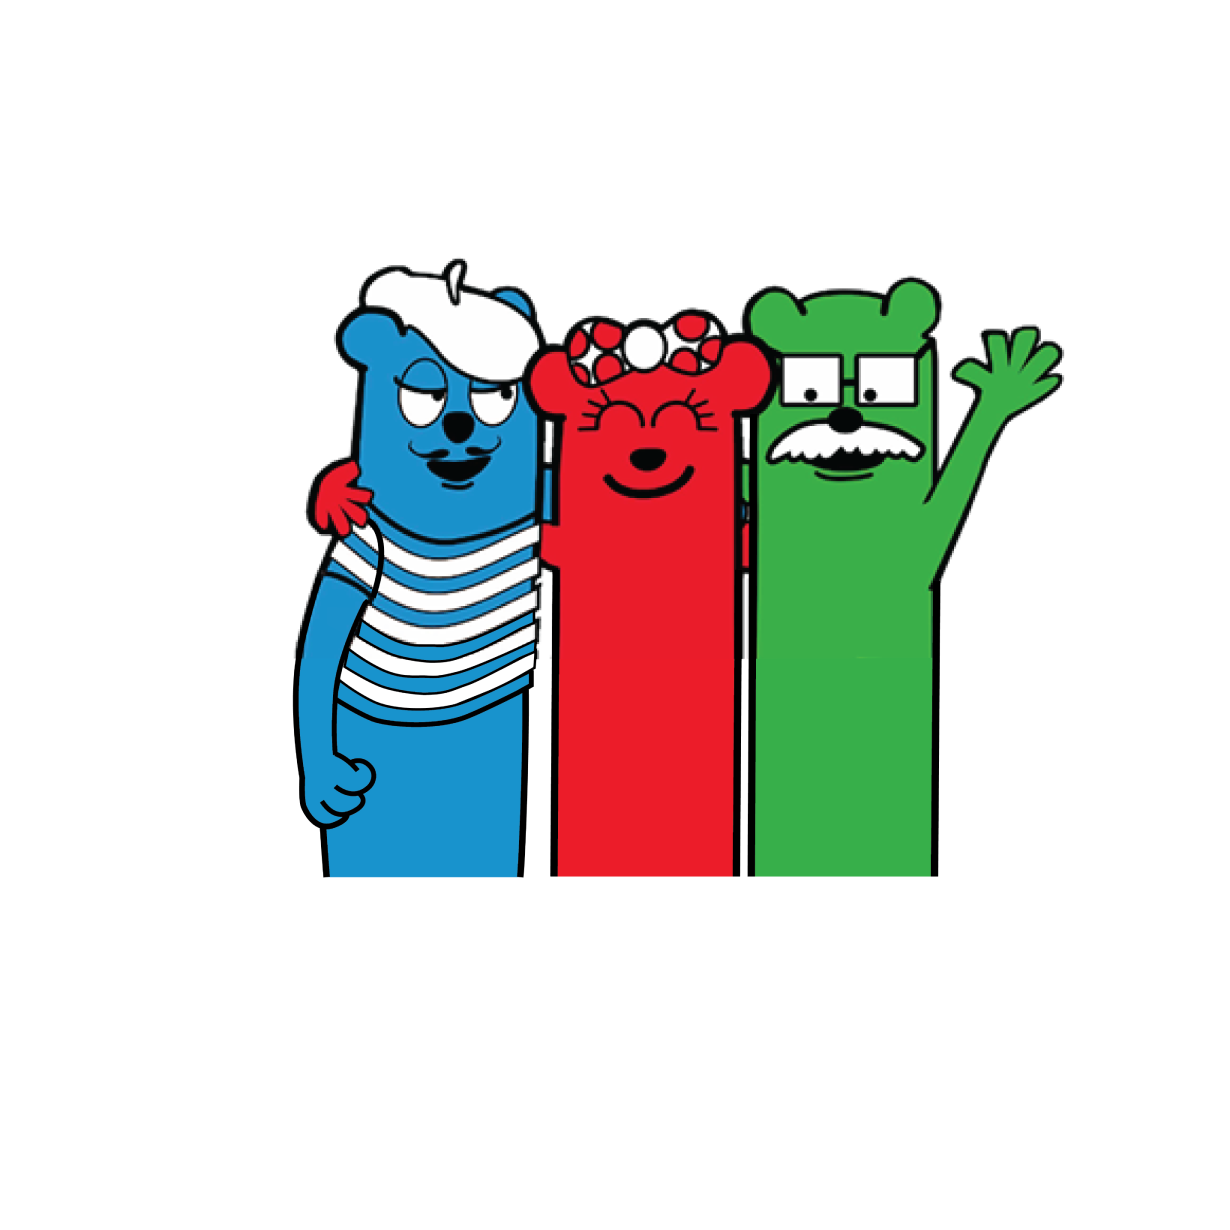 Otter Pops characters waving